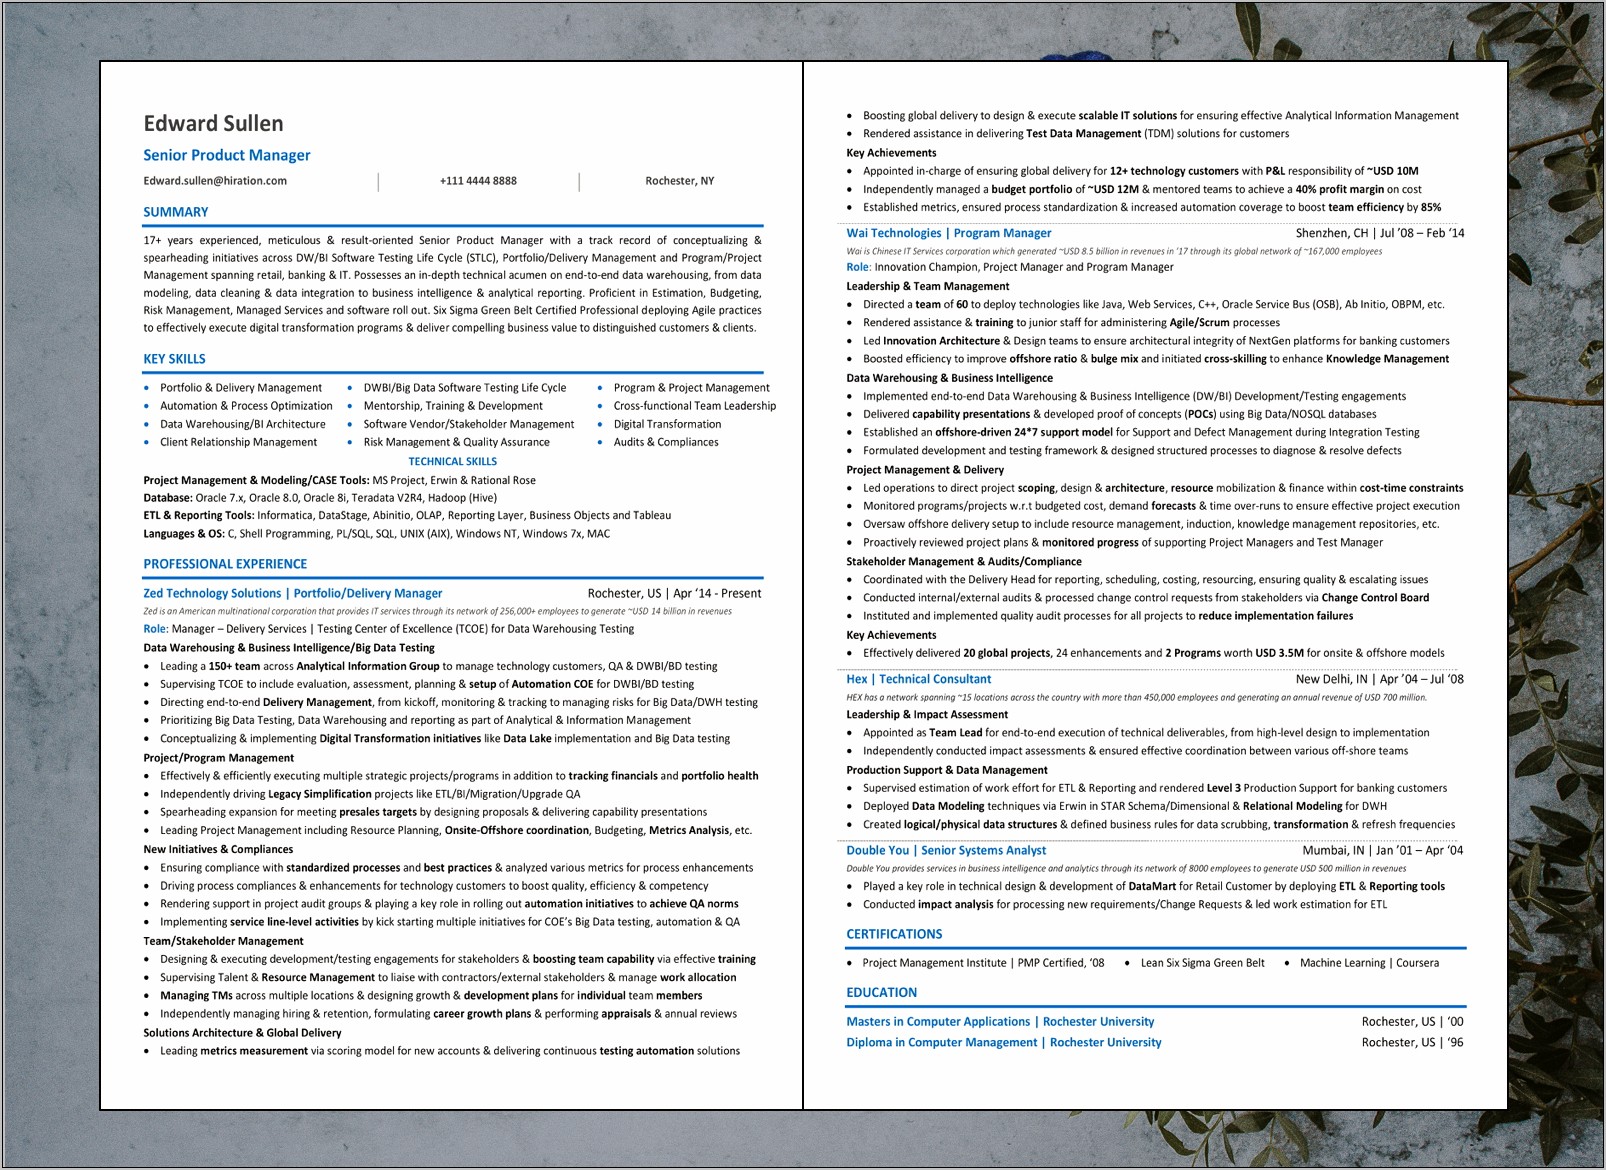 Resume Summary For A Product Manager